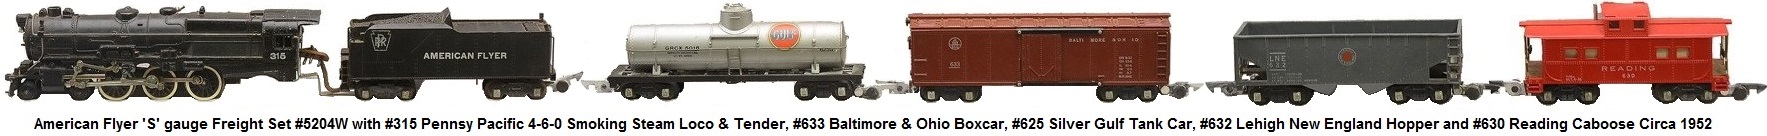 American Flyer 'S' gauge freight set #5204W circa 1952 with #315 Pennsy Pacific loco with smoke and choo-choo sounds, tender #633 Baltimore & Ohio boxcar #625 silver Gulf tank #632 Lehigh New England hopper and #630 Reading caboose